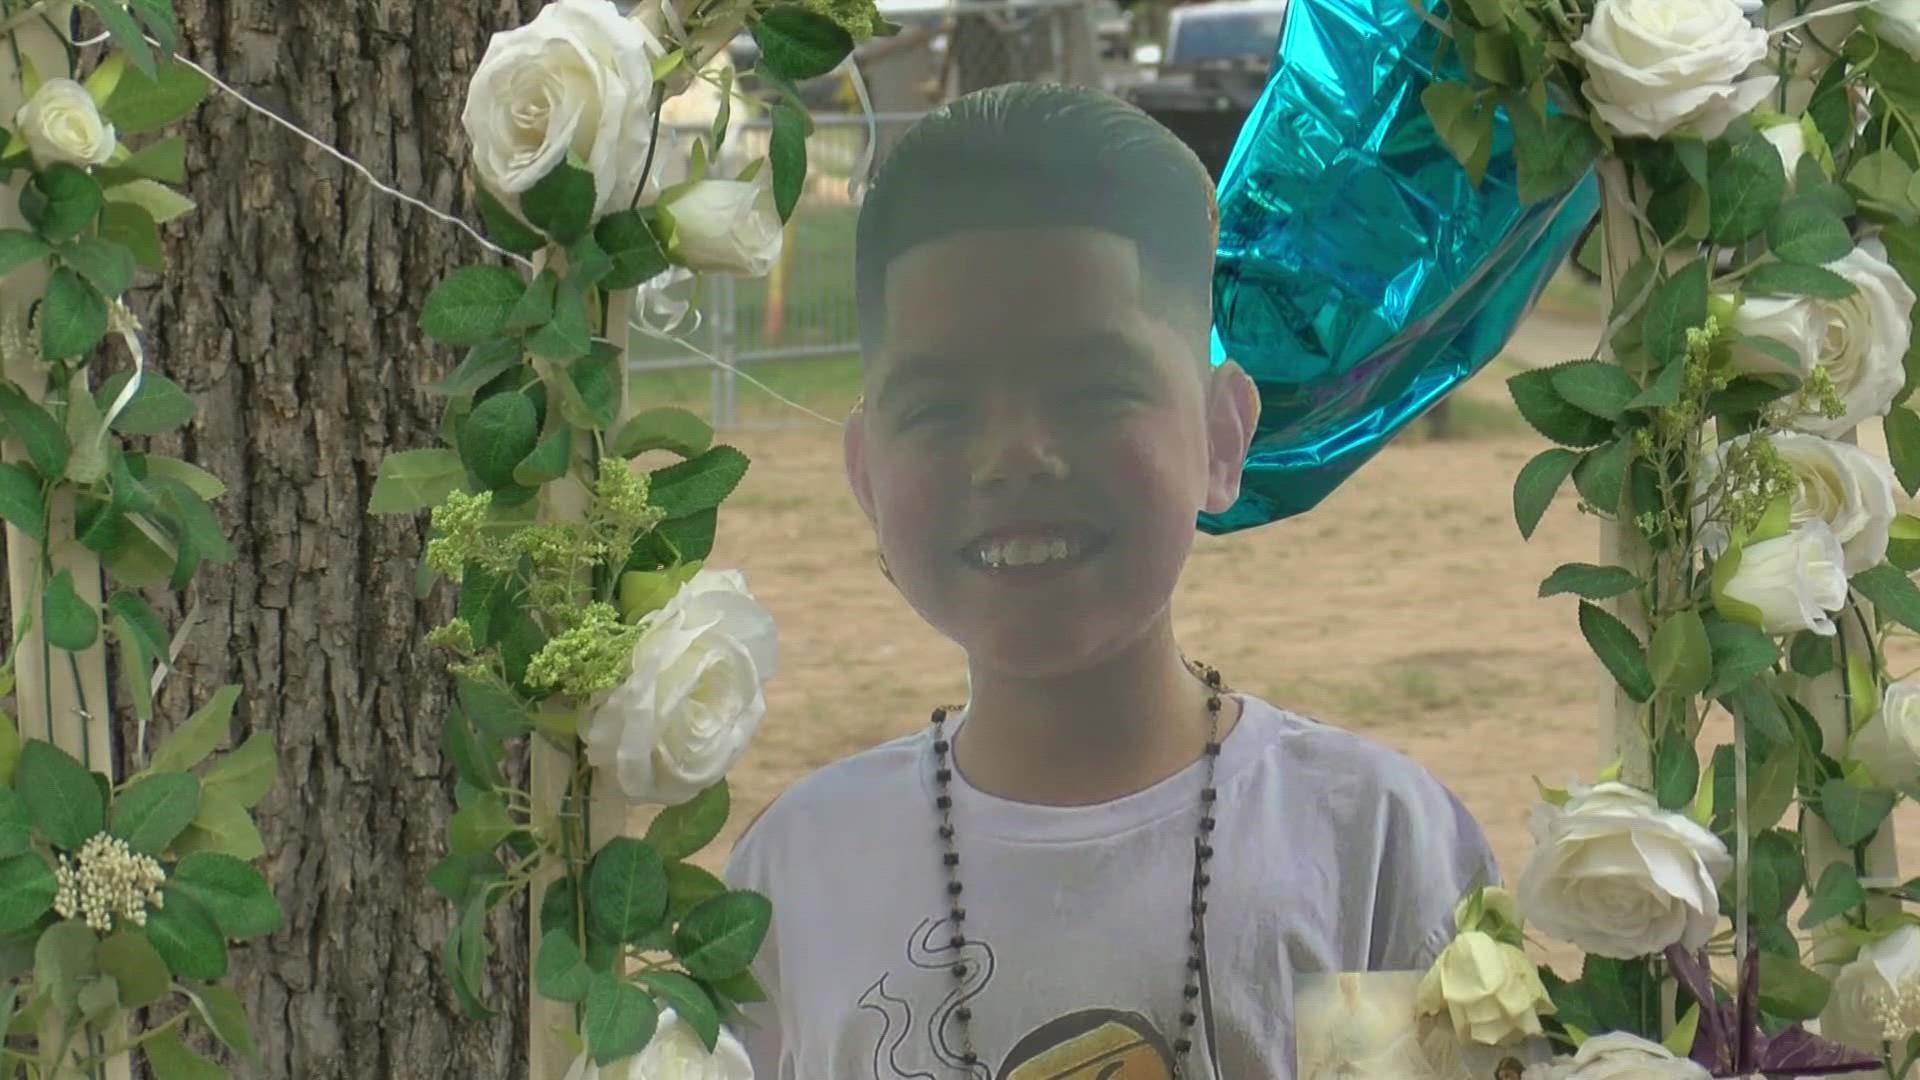 Jose was laid to rest on Wednesday afternoon.